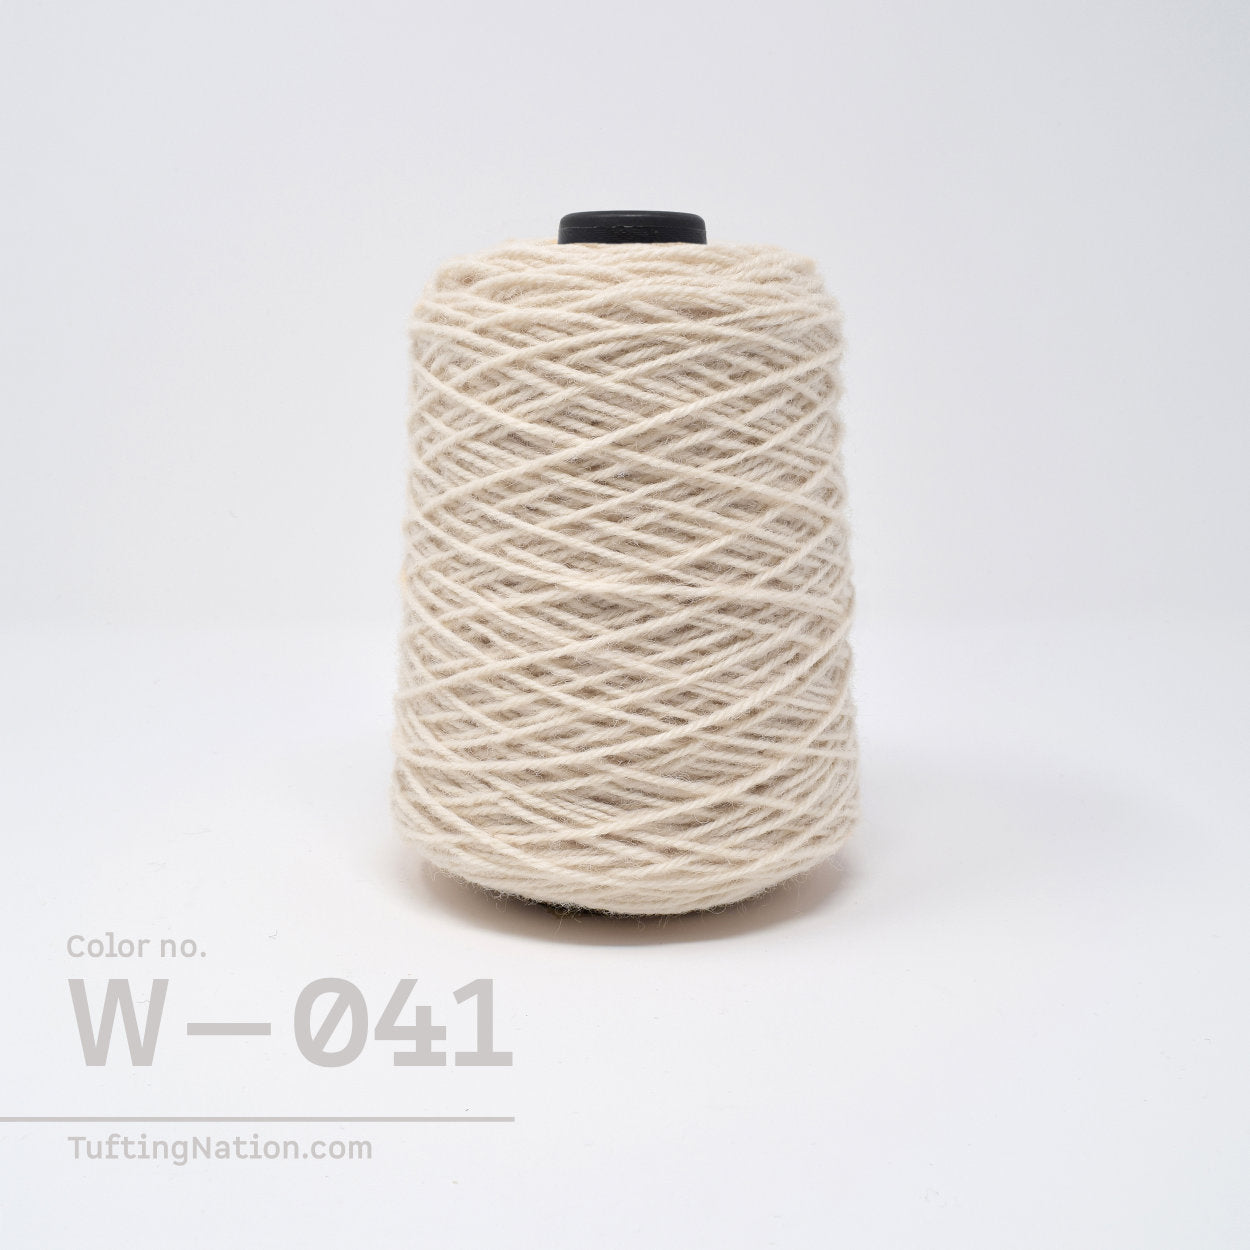 Cream Tufting Yarn On Spool for Rug Tufting, Weaving and Punch Needle | TuftingNation